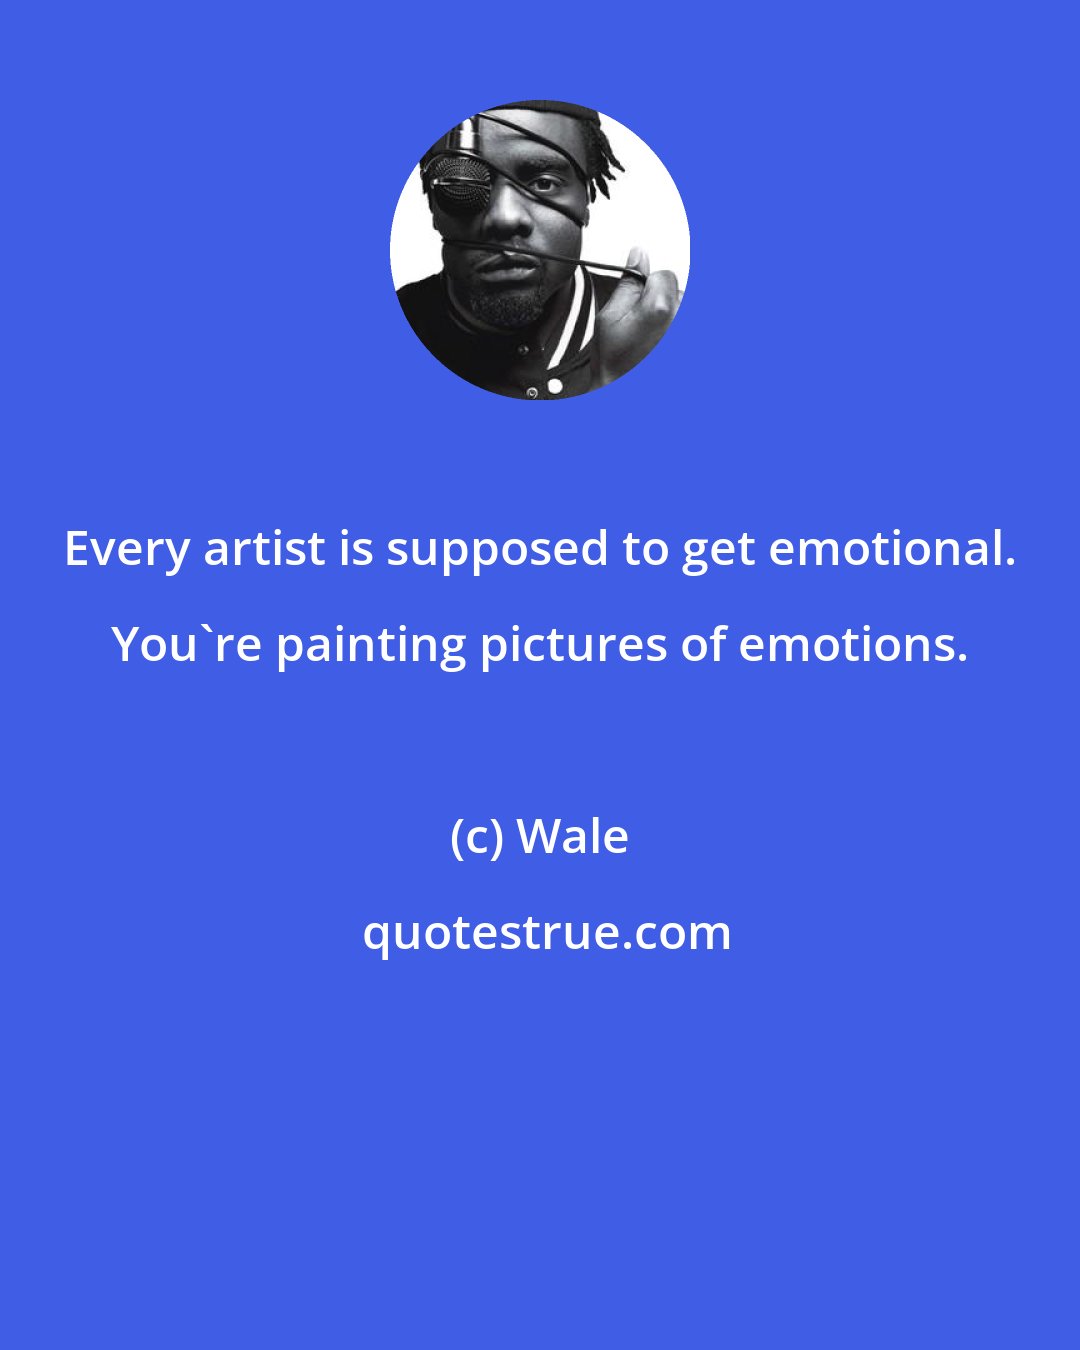 Wale: Every artist is supposed to get emotional. You're painting pictures of emotions.